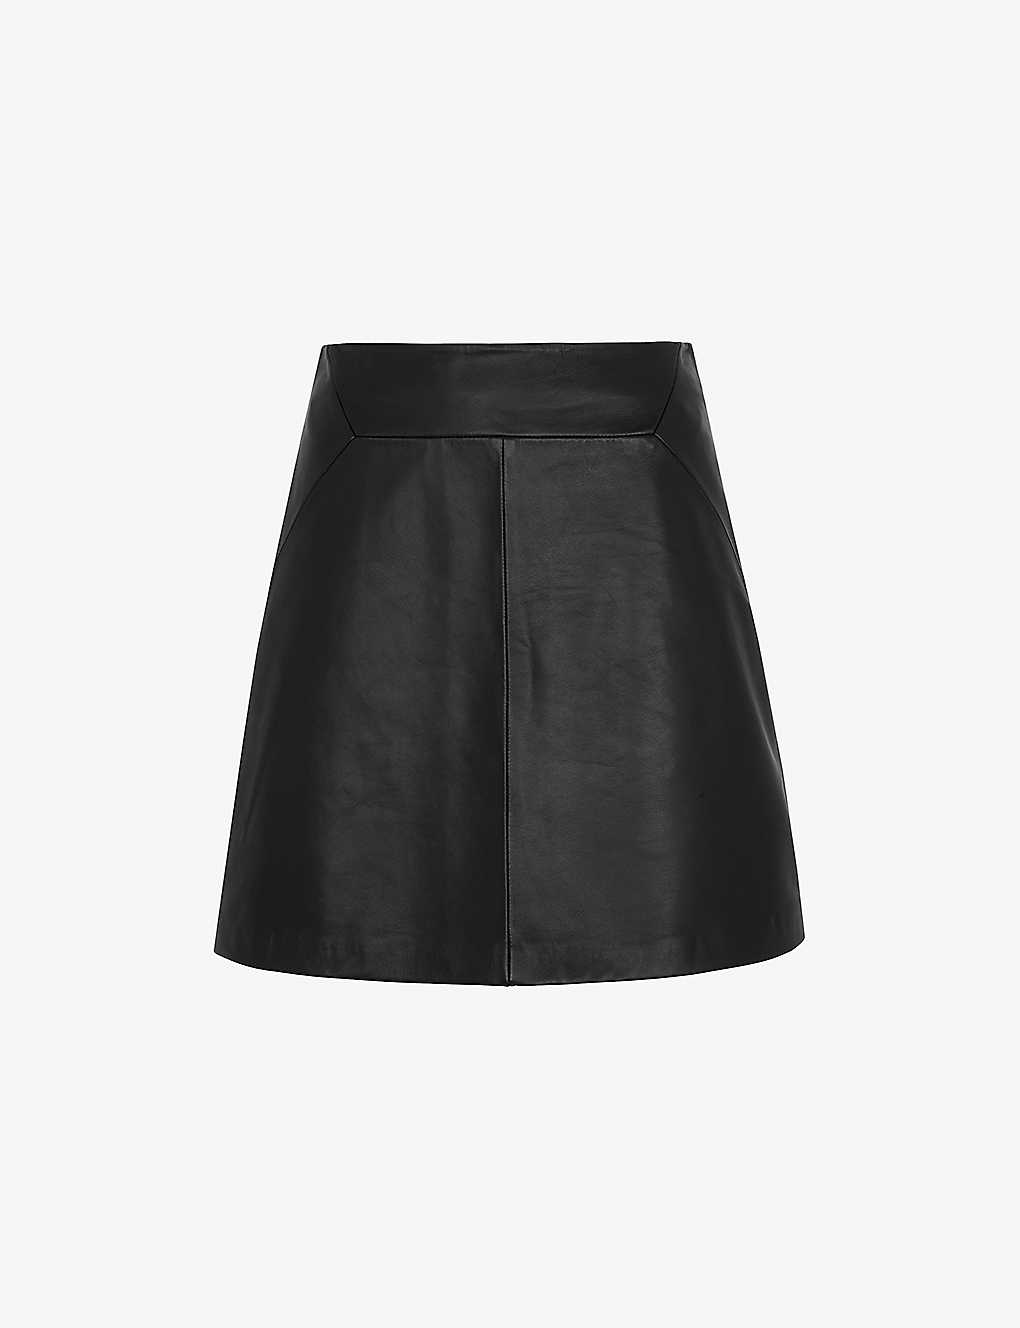 Whistles Womens Black High-waisted A-lined Leather Mini Skirt